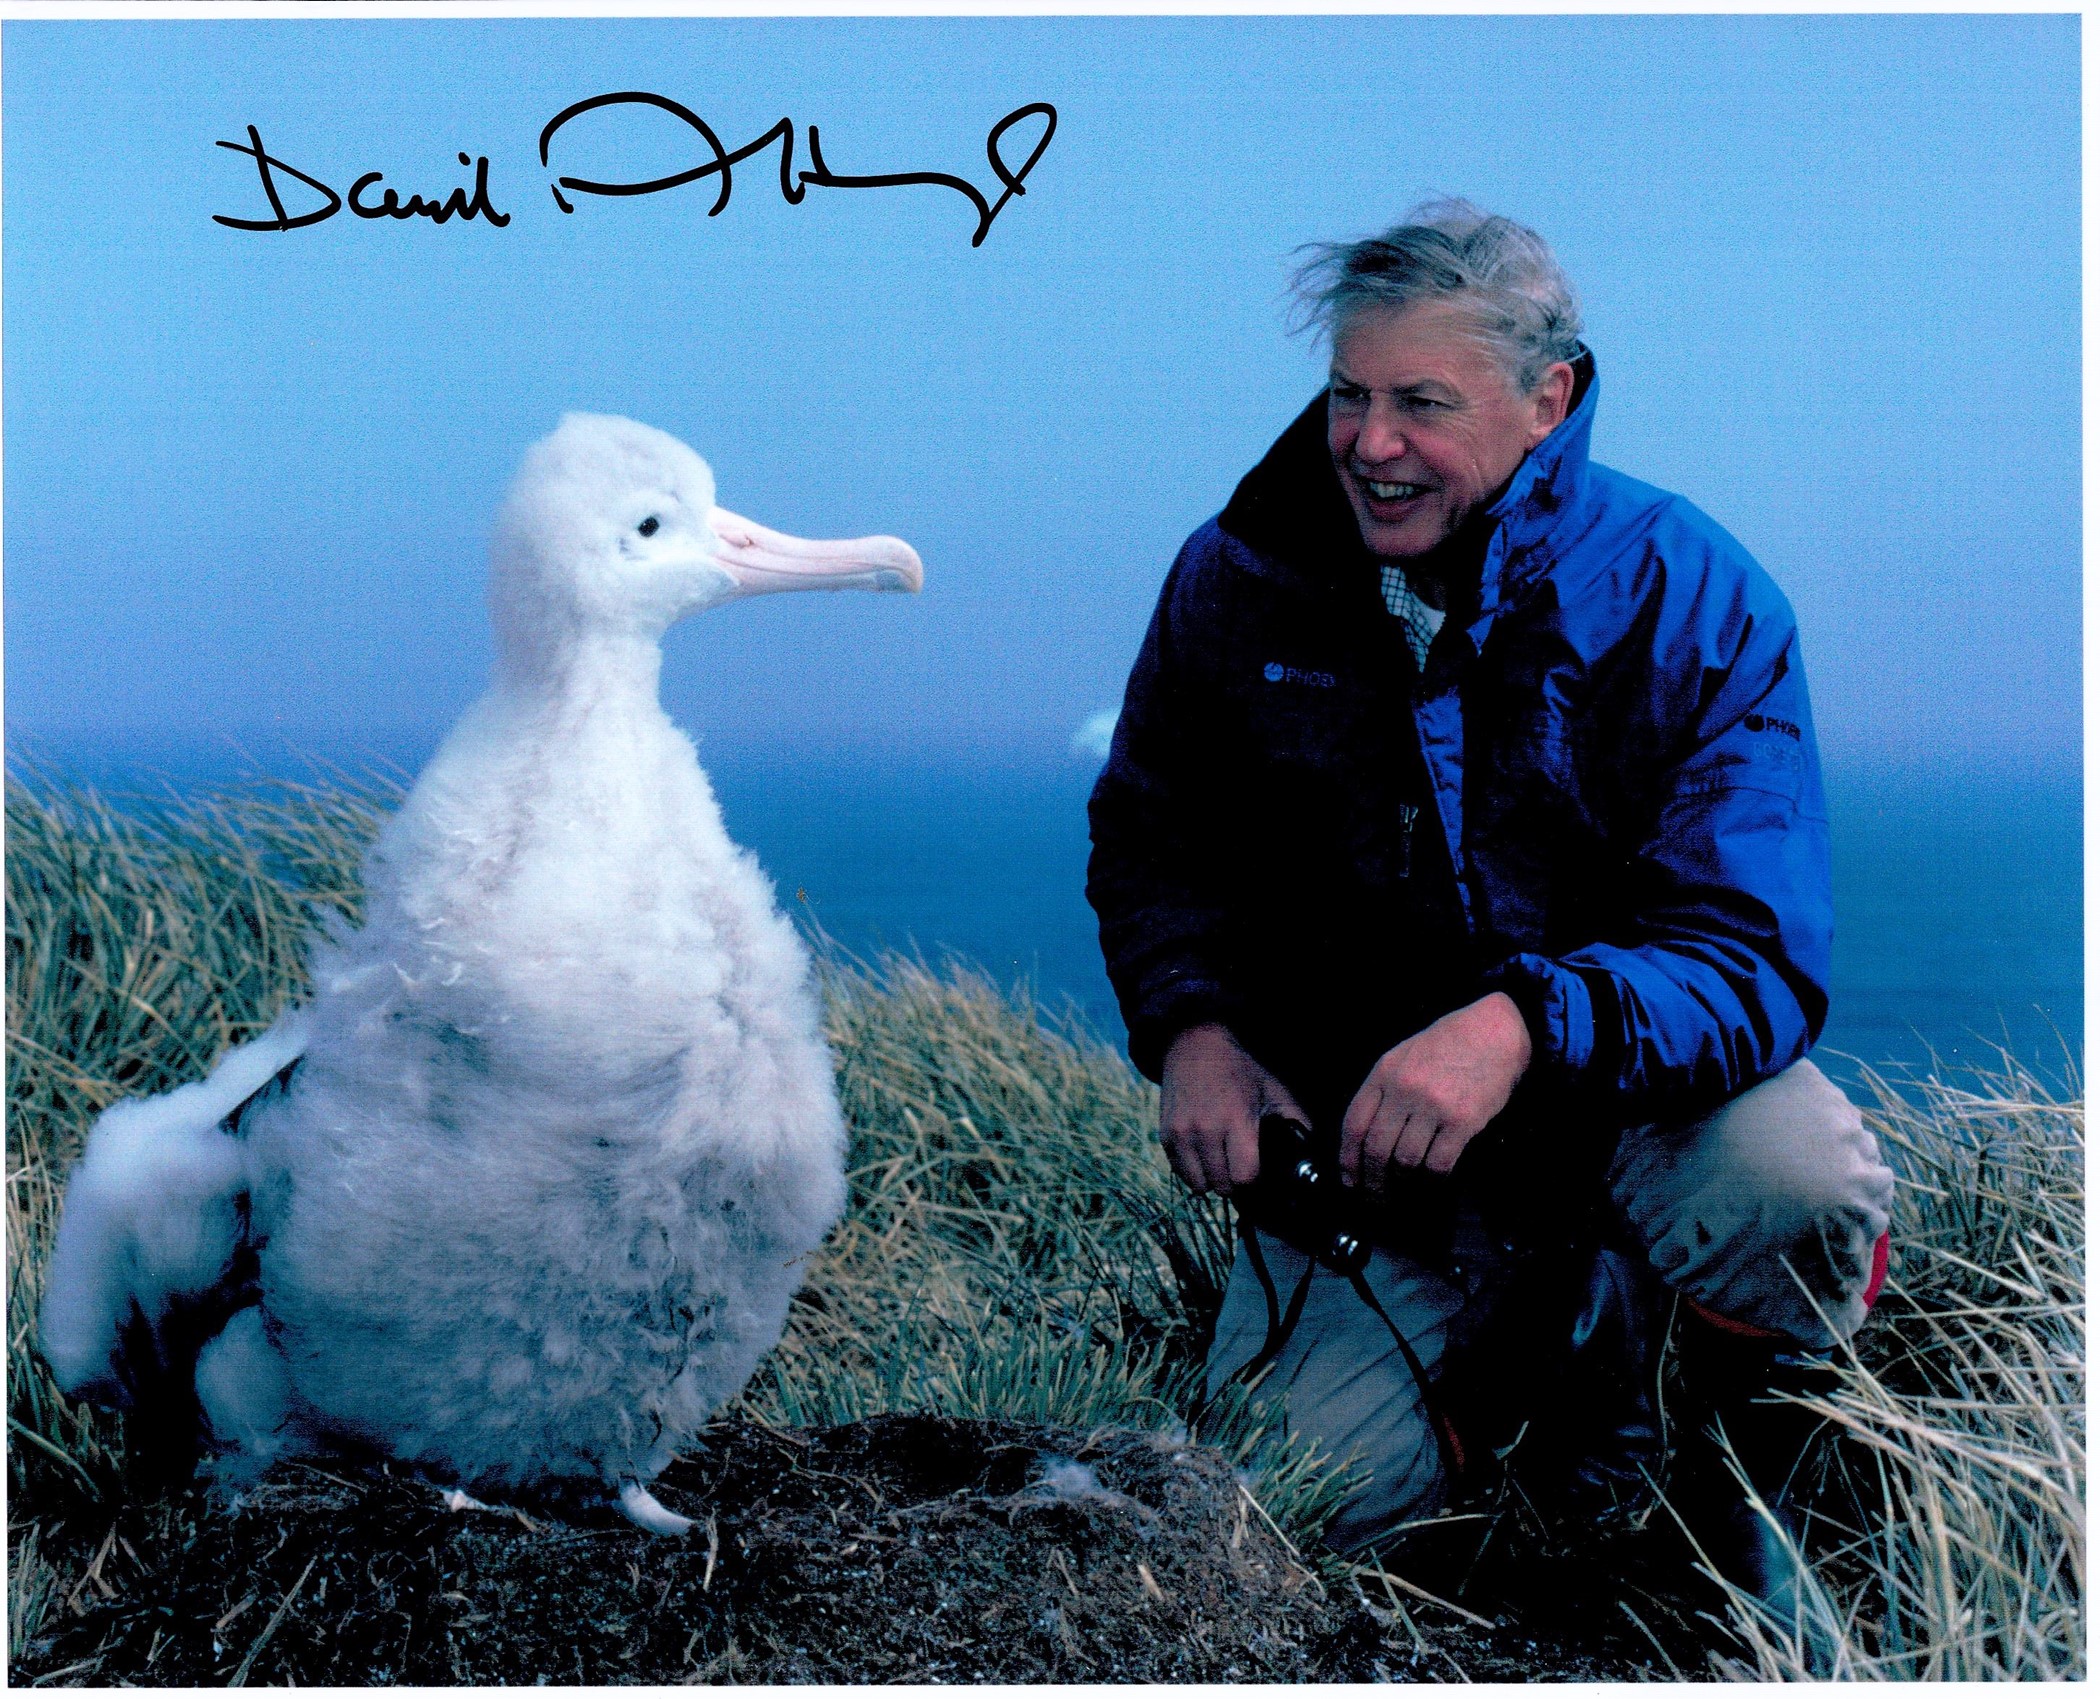 Sir David Attenborough signed 10x 8 inch photo in nature setting. Good condition. All autographs